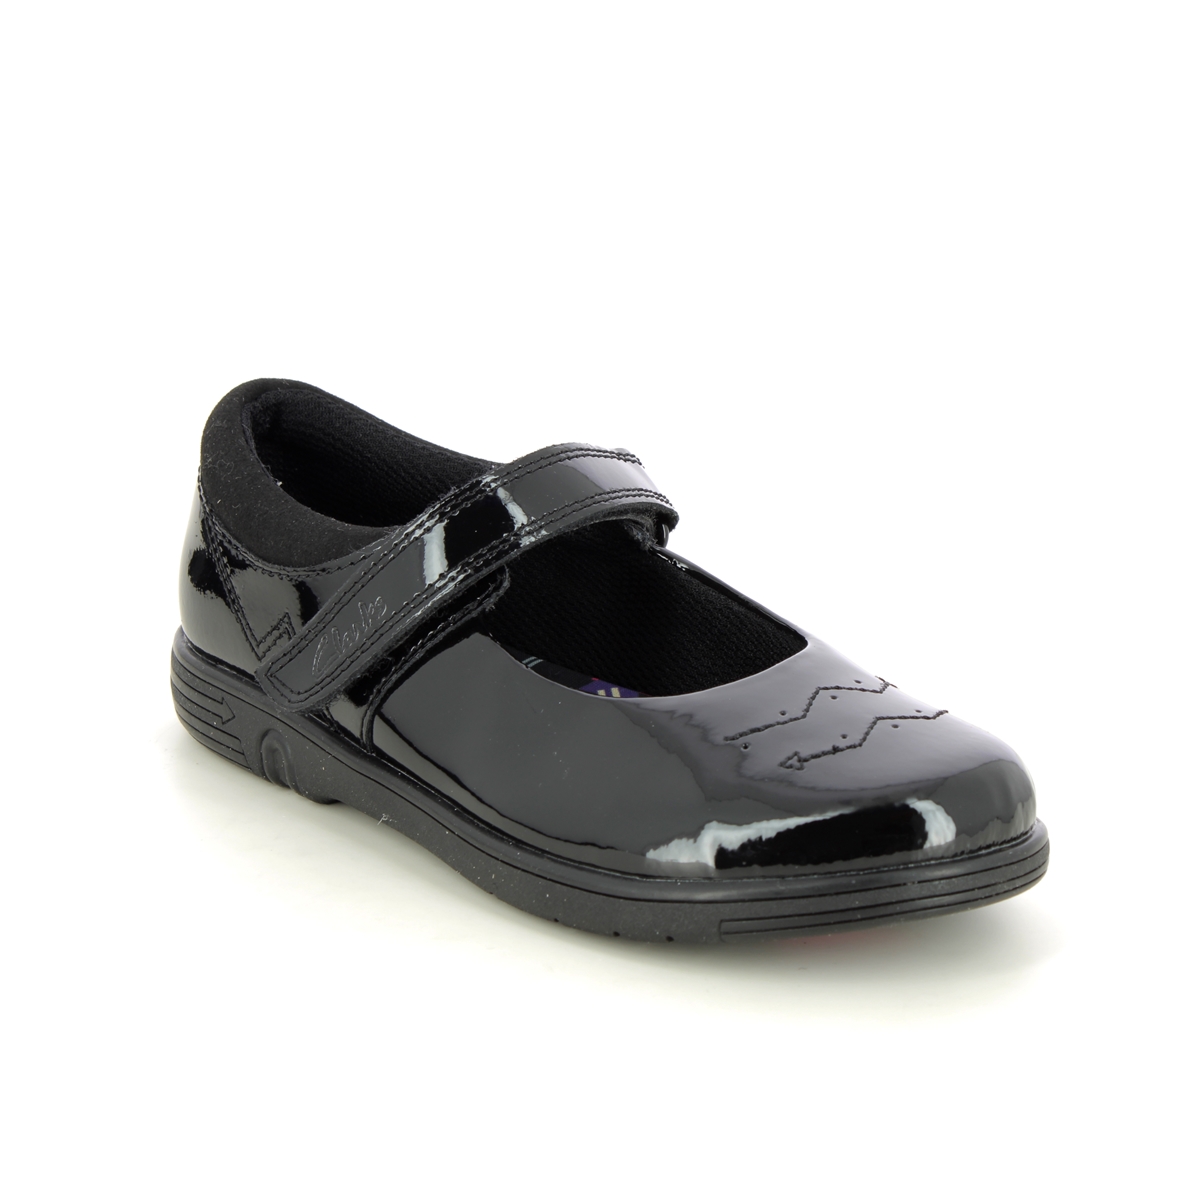 Clarks Jazzy Jig K Mary Jane Black Patent Kids Girls School Shoes 753086F In Size 1 In Plain Black Patent F Width Fitting Regular Fit For School For k